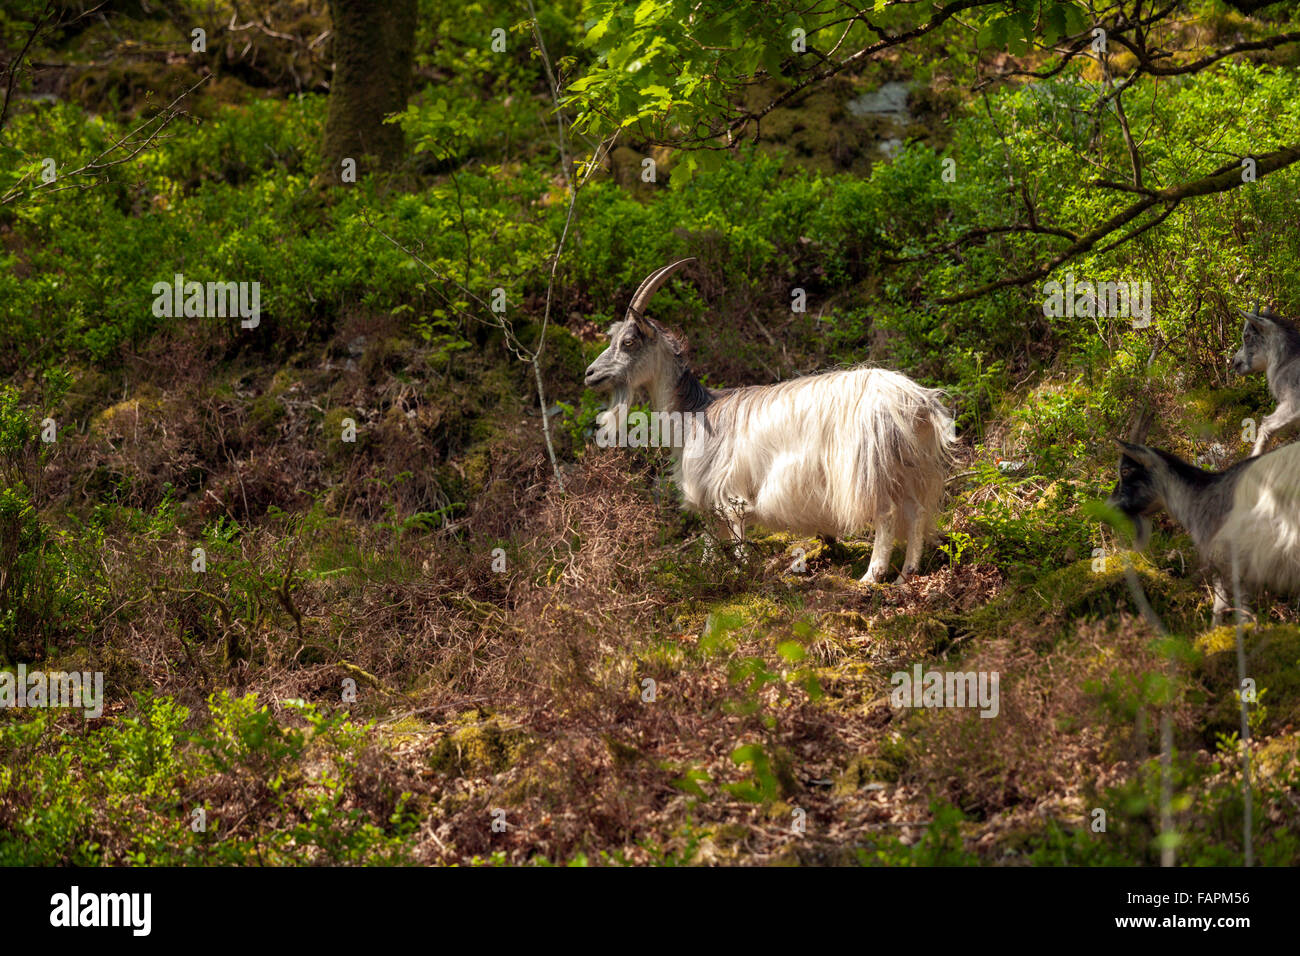 Feral goats browsing in undergrowth on the sides of the Rhinog mountain range. Welsh wild goats in the Rhinogs. Stock Photo